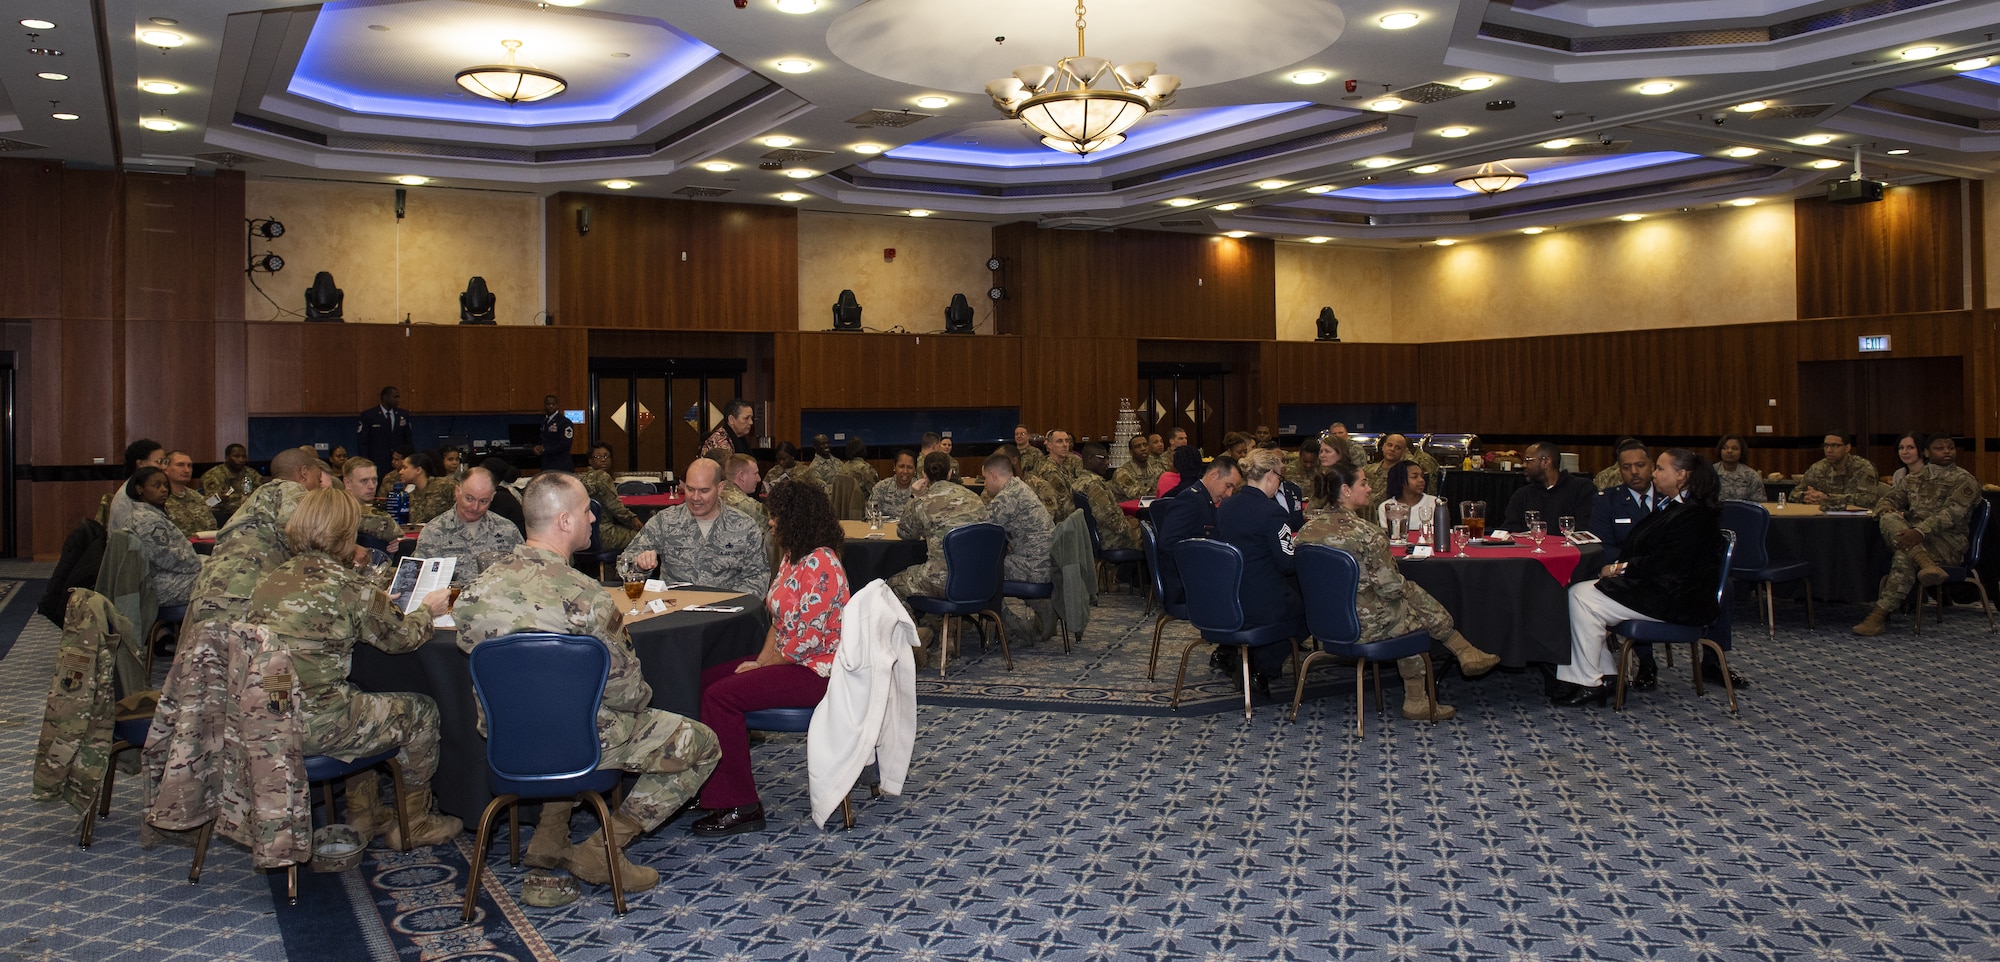 Members of the 52nd Fighter Wing and their family members gather for the annual Black History Month Luncheon at Spangdahlem Air Base, Germany, Feb. 24, 2020. The luncheon celebrated Black History Month and commemorated famous African-Americans who pioneered the Civil Rights Movement. (U.S. Air Force photo by Airman 1st Class Alison Stewart)